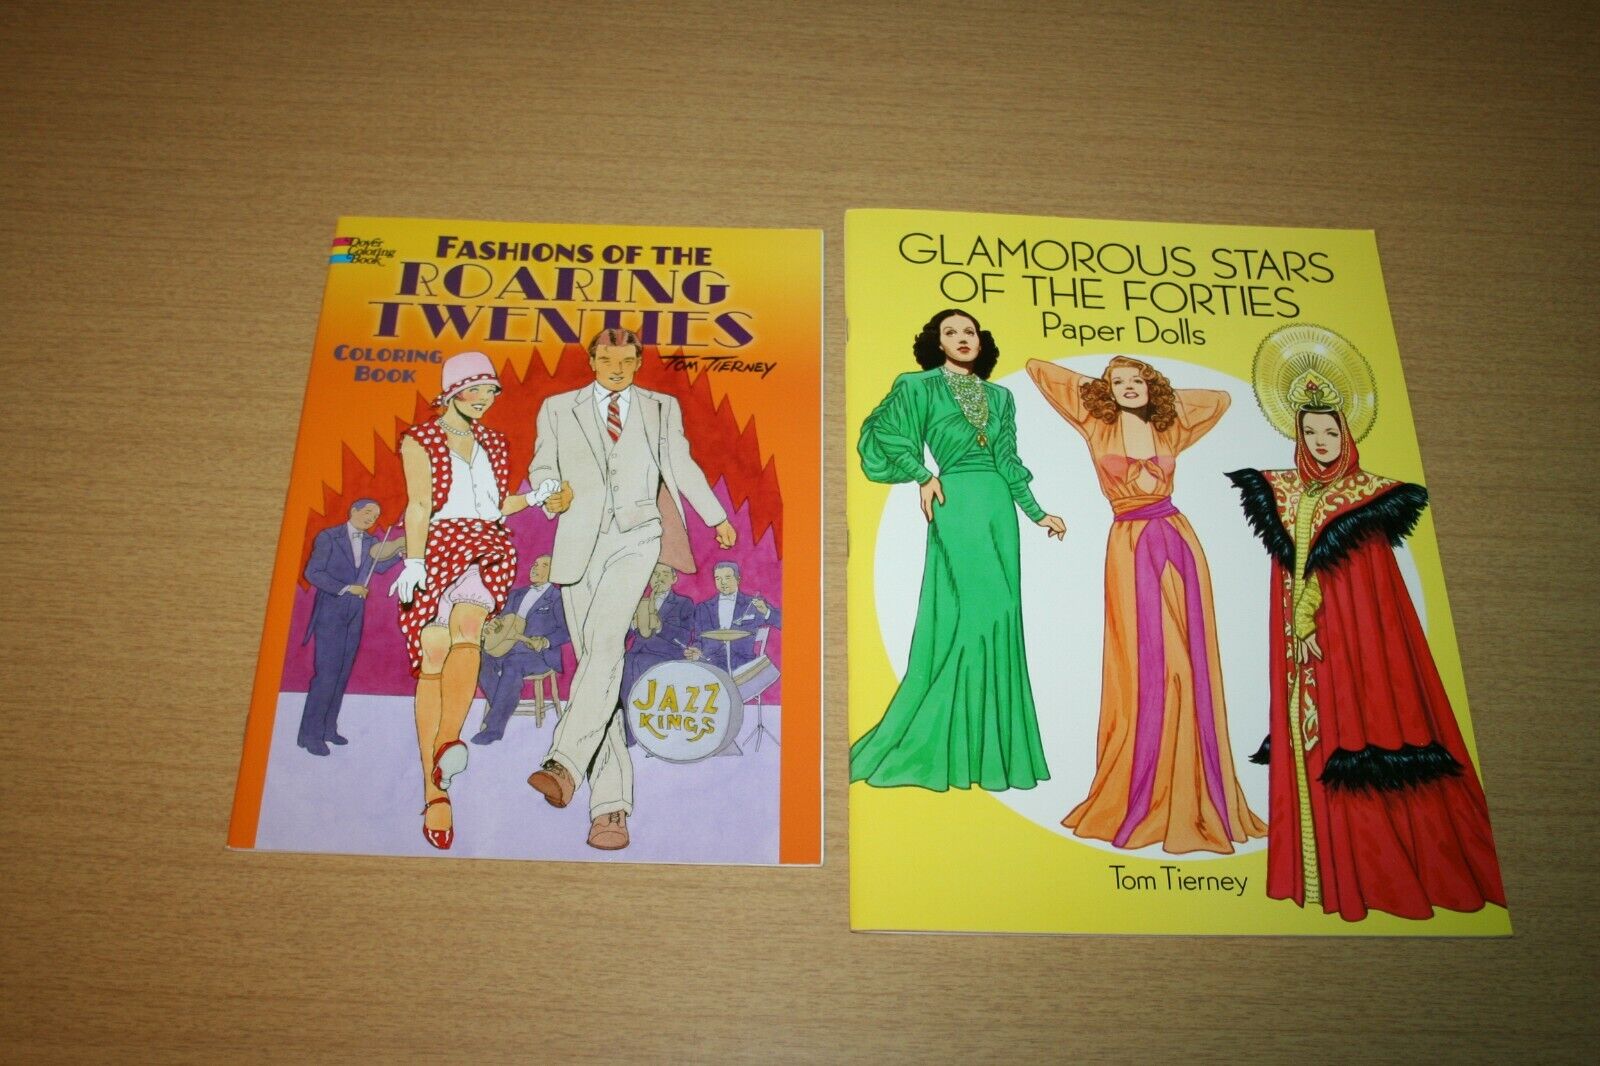 Tierney Paper Doll & Coloring Book Glamorous Stars & Fashions Roaring 20s #10 Tom Tierney